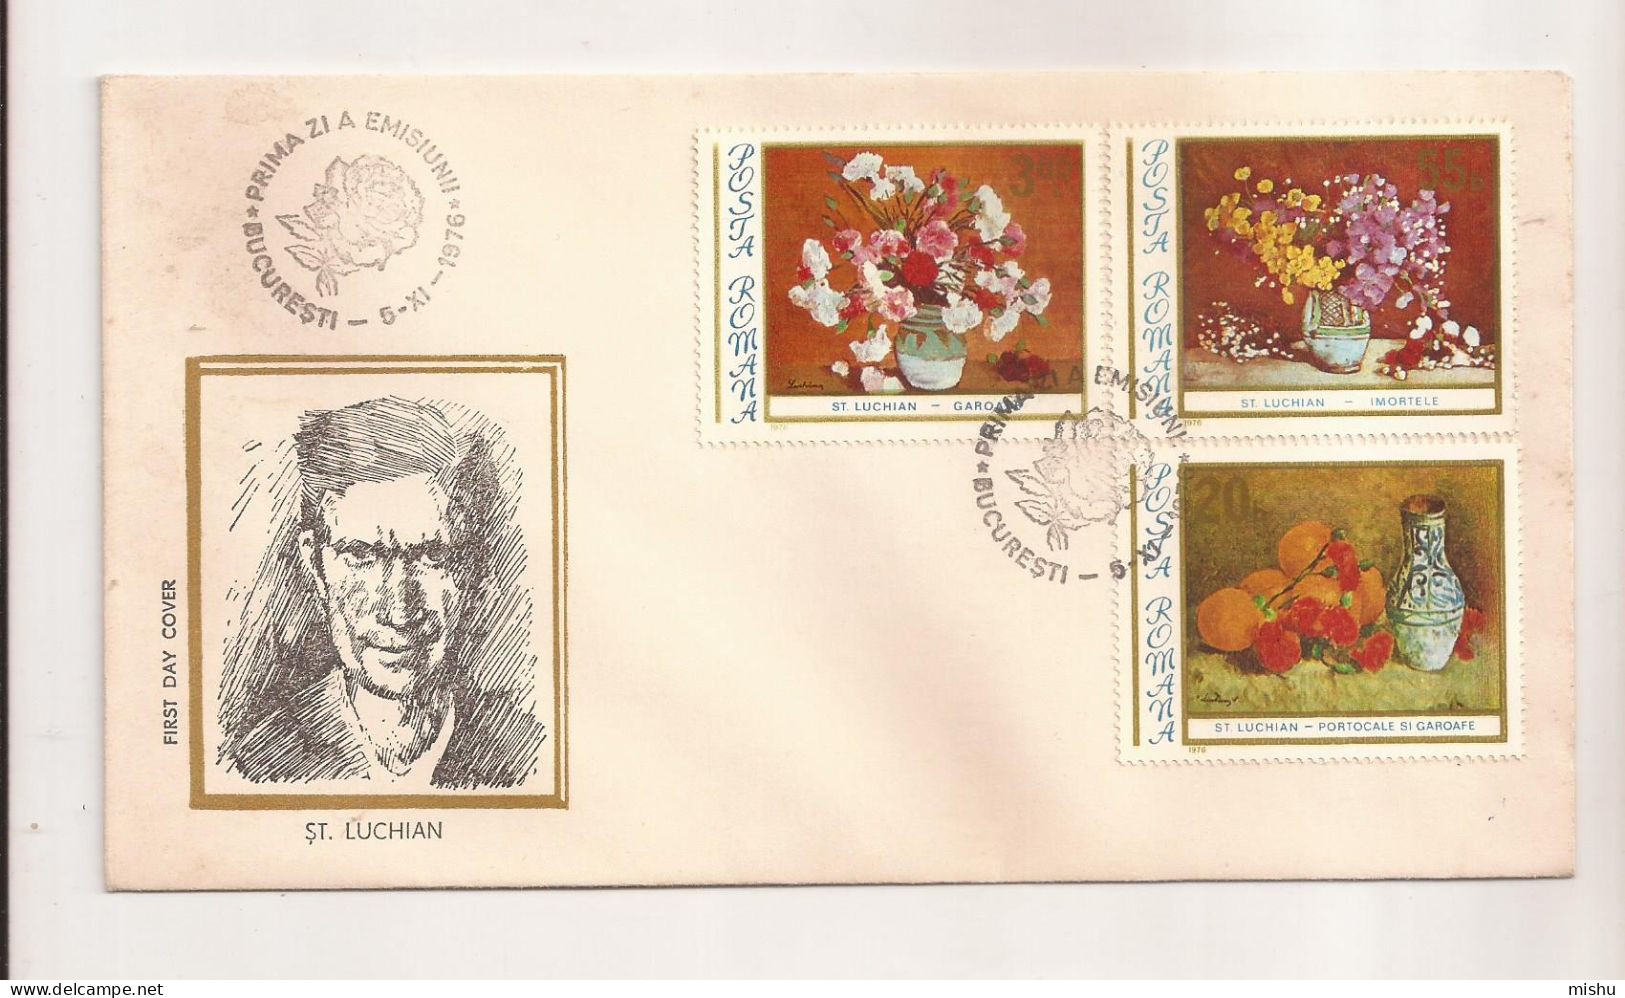 P4 Plic FDC ROMANIA - Prima Zi A Emisiunii - Stefan Luchian - First Day Cover ,uncirculated 1976 - FDC